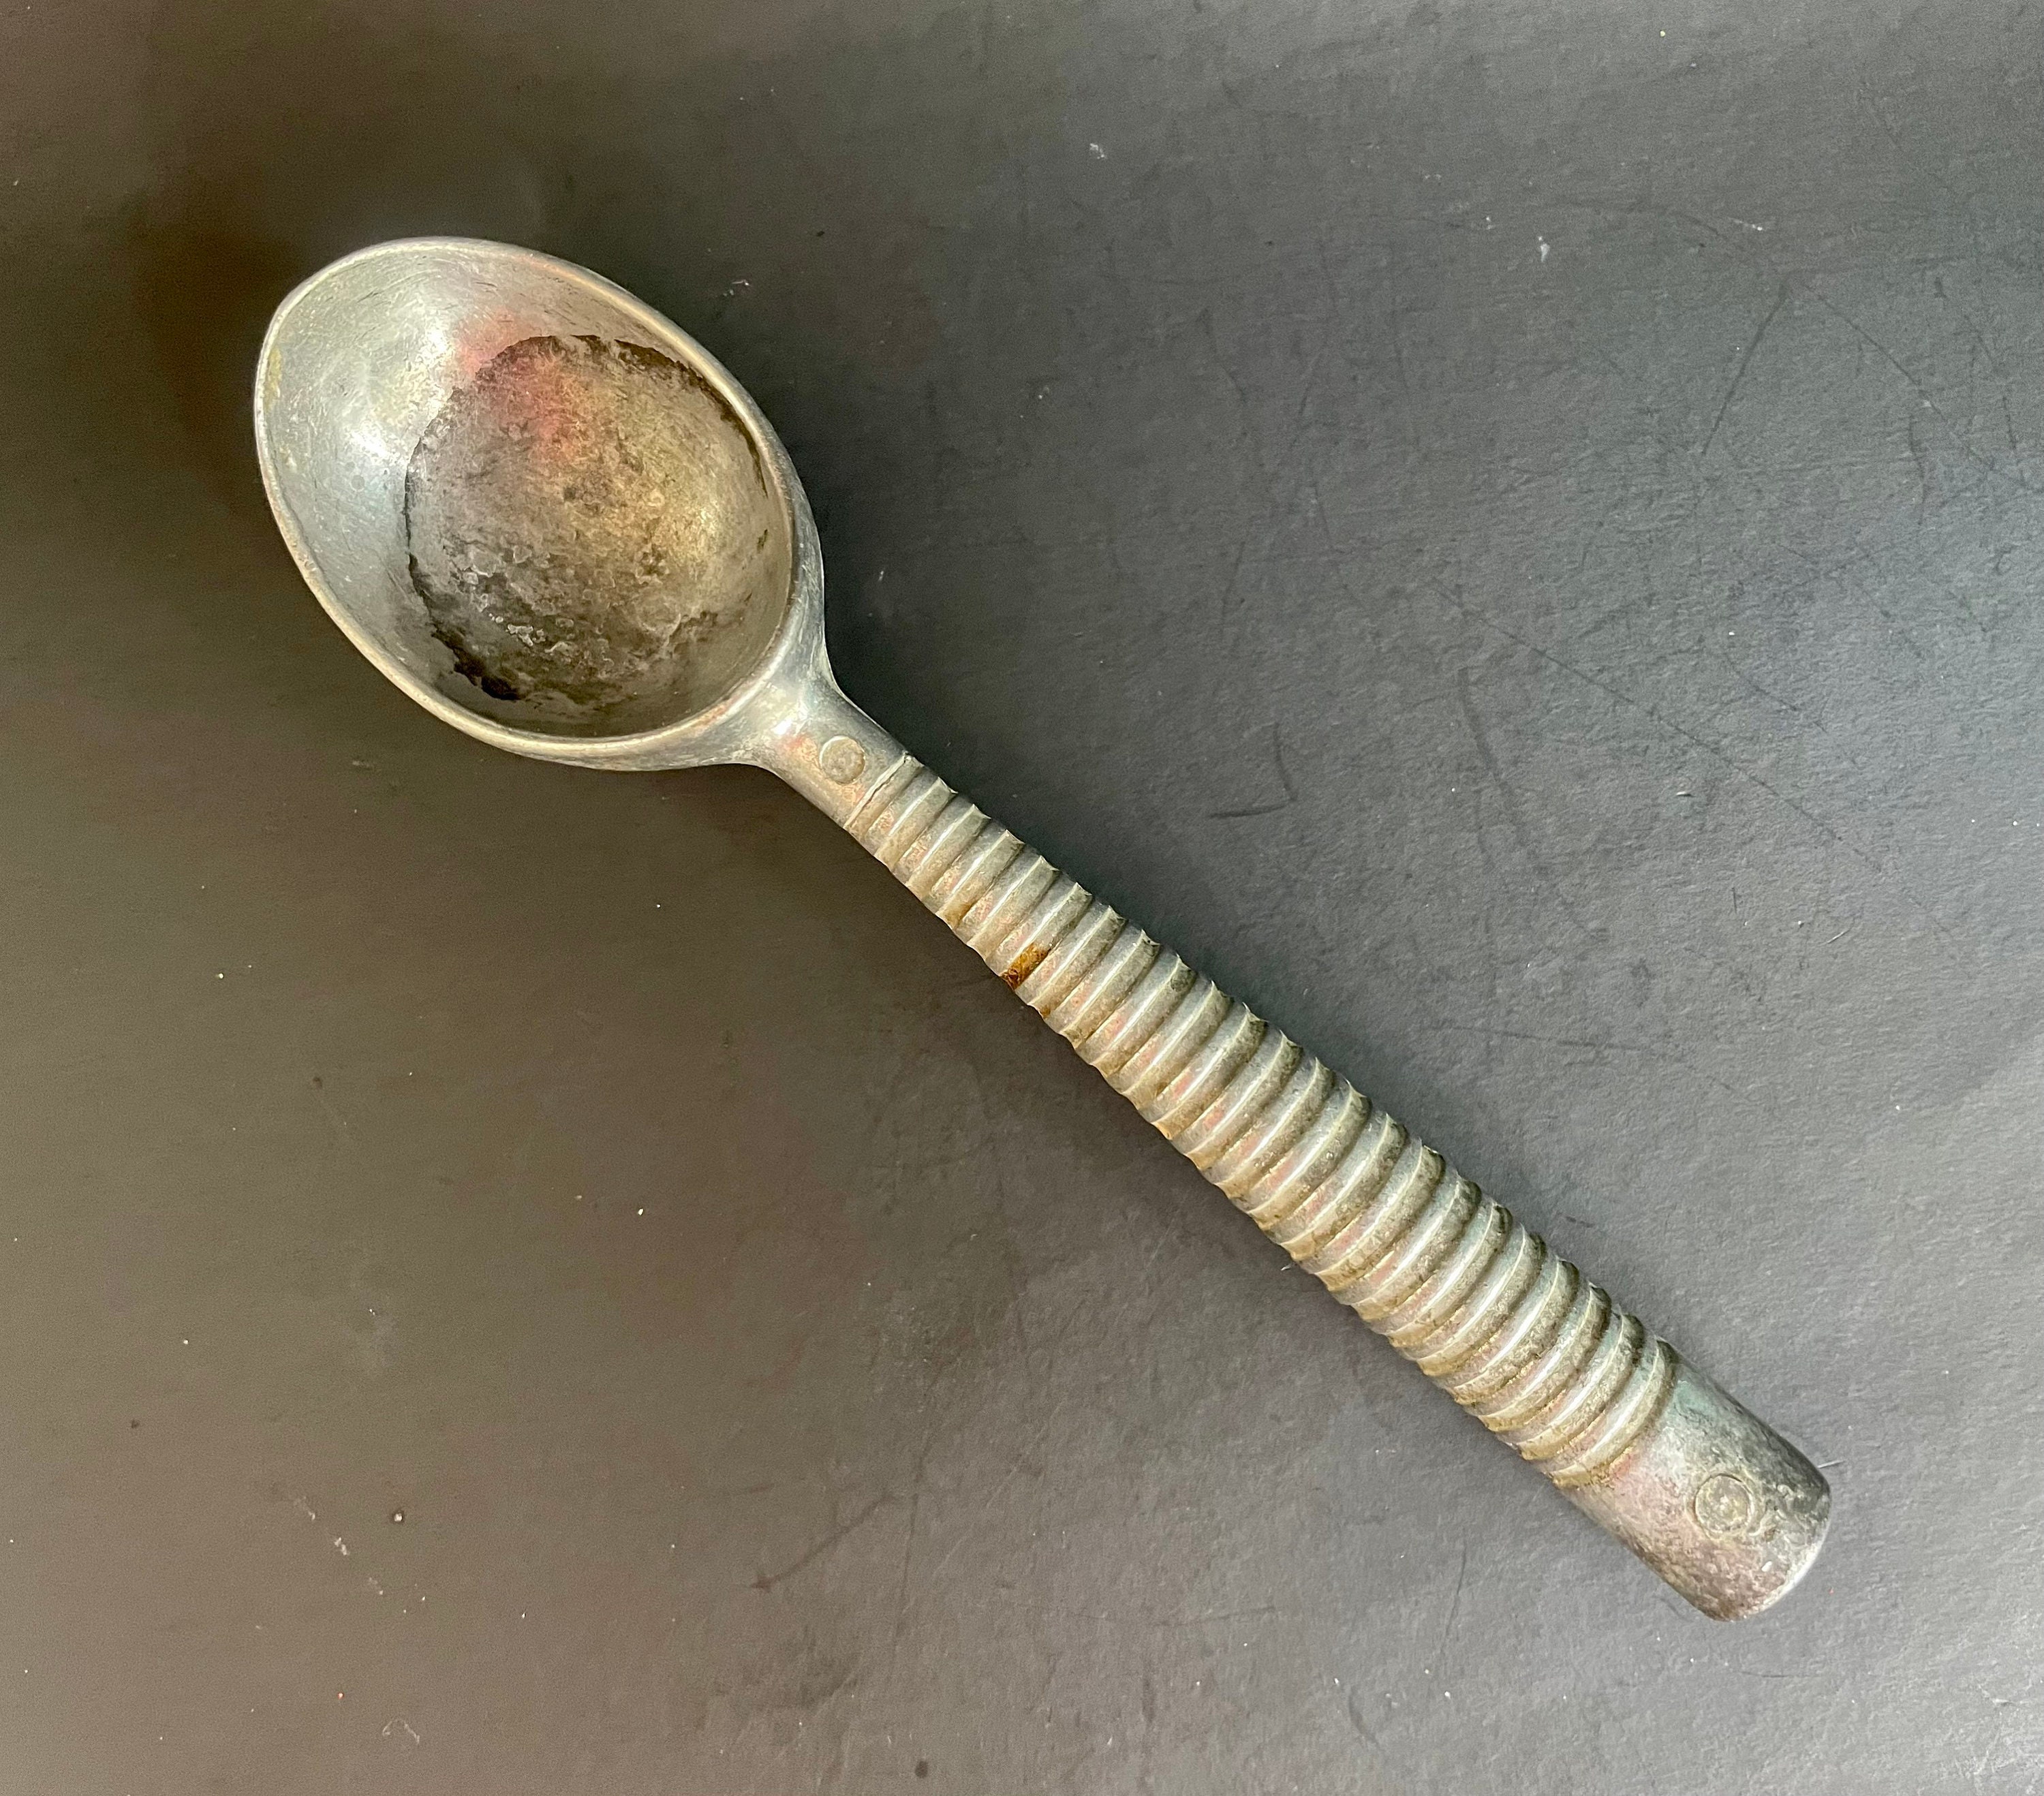 Vintage Cast Metal Ice Cream Scoop - Old Fashioned #12 Grey End 7 Inch